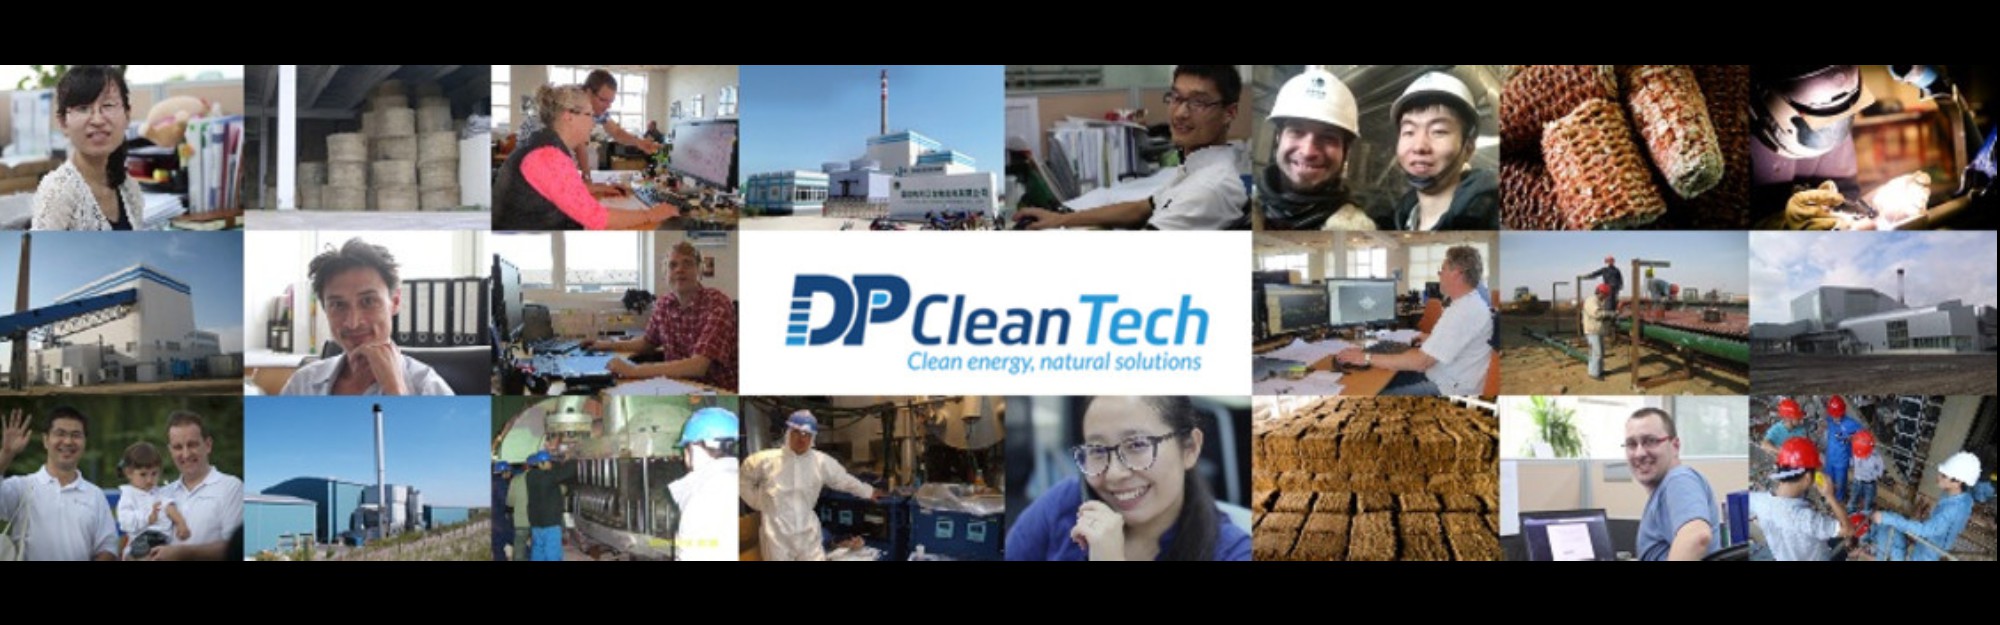 DP CleanTech Global Engineering Services ApS